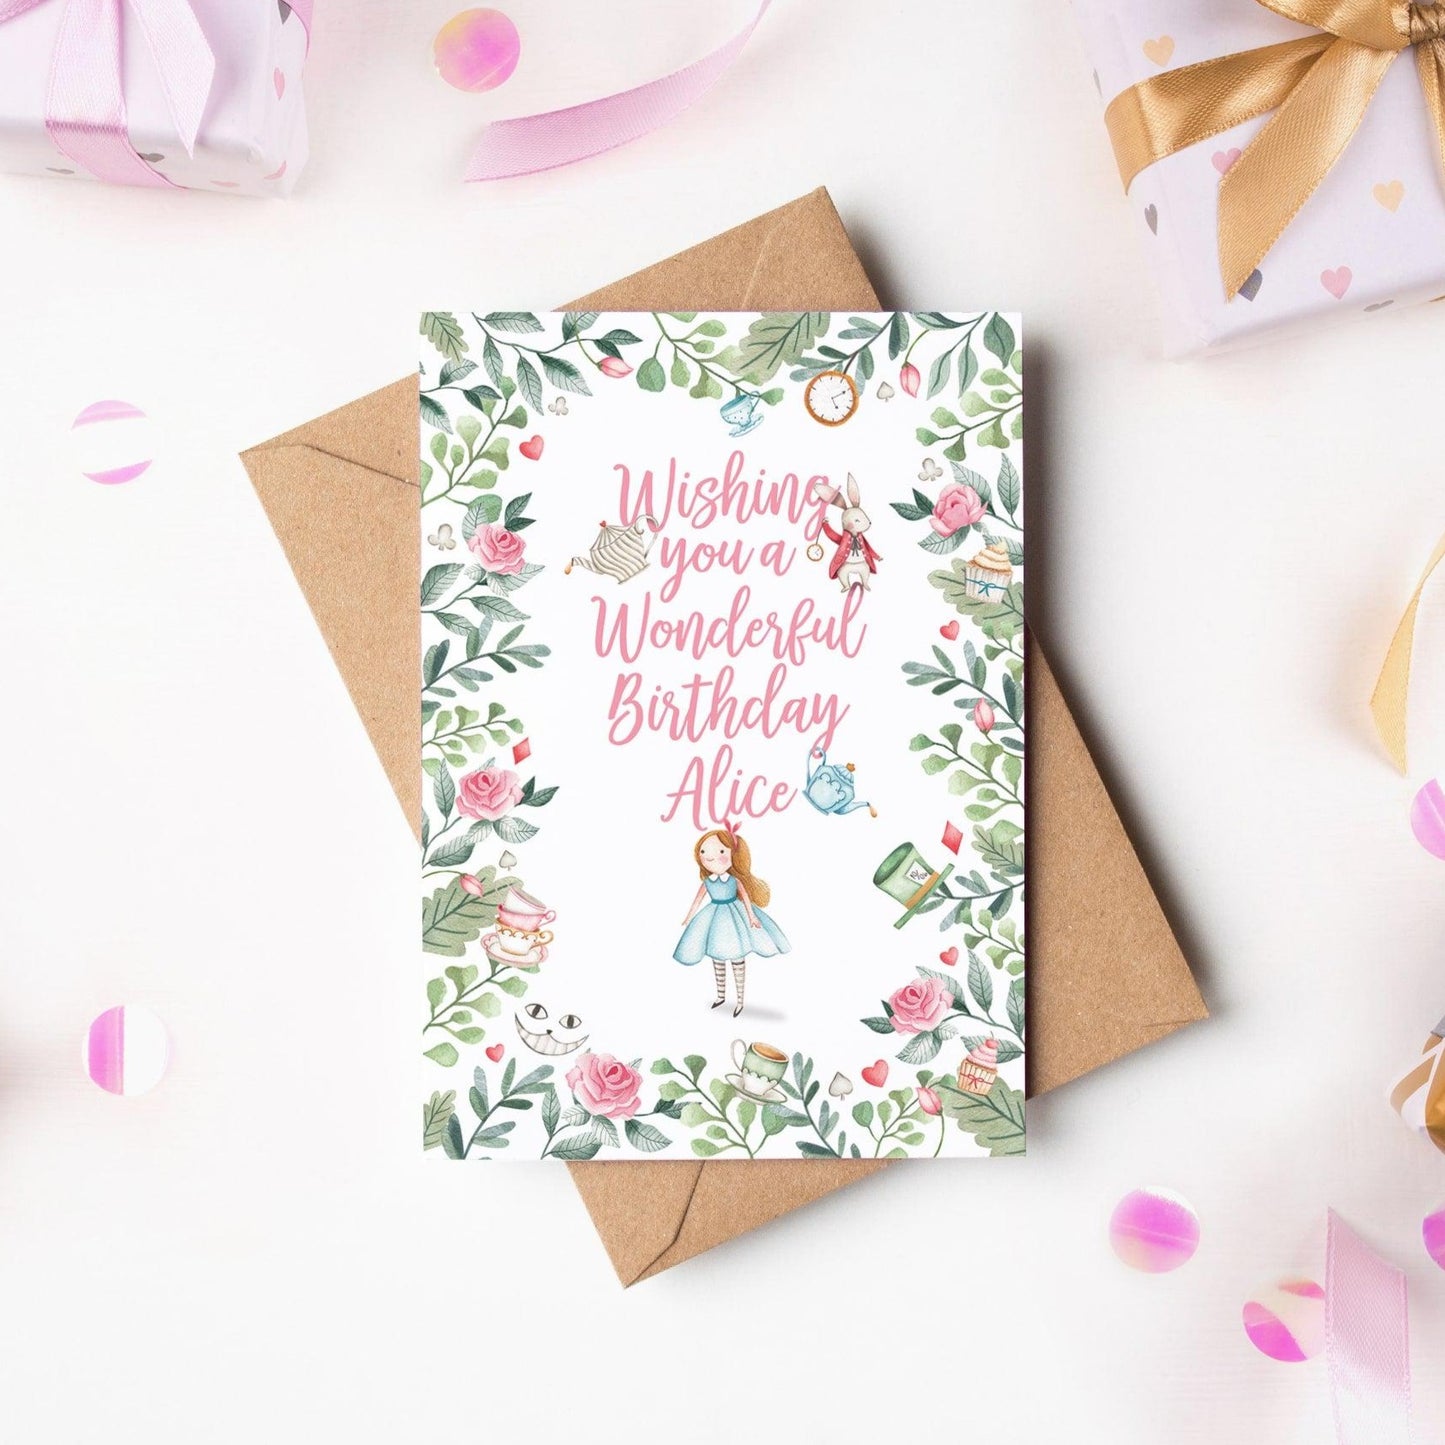 Alice in wonderland personalised birthday card with pink copy